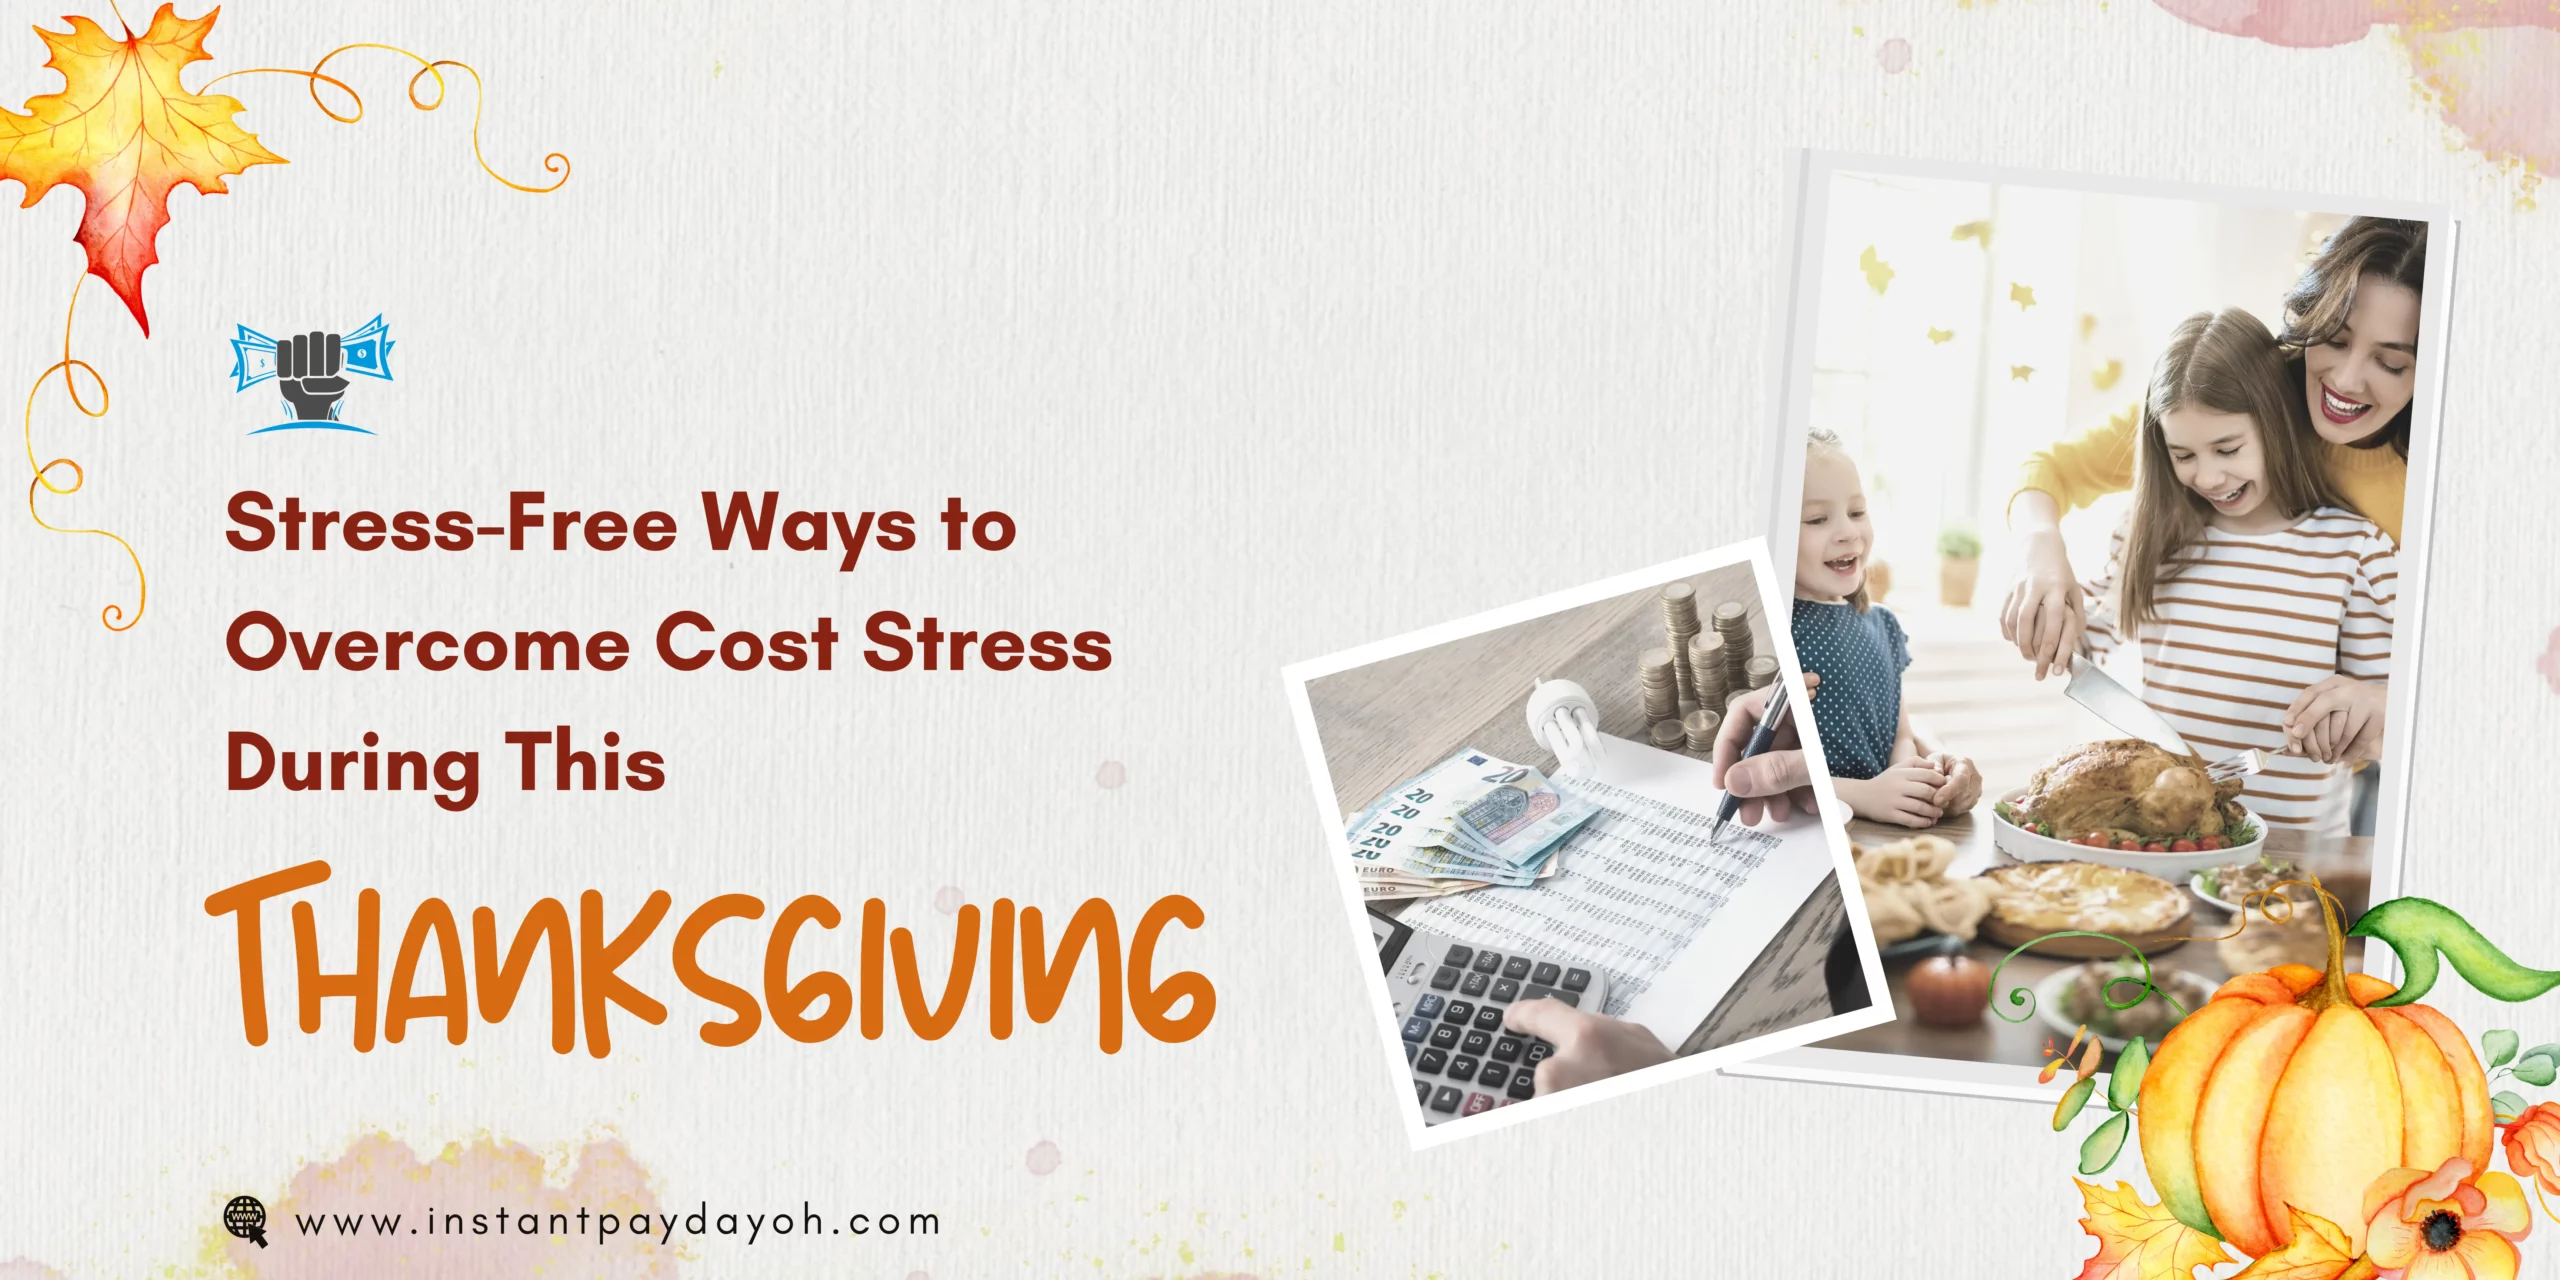 Stress-Free Ways to Overcome Cost Stress During This